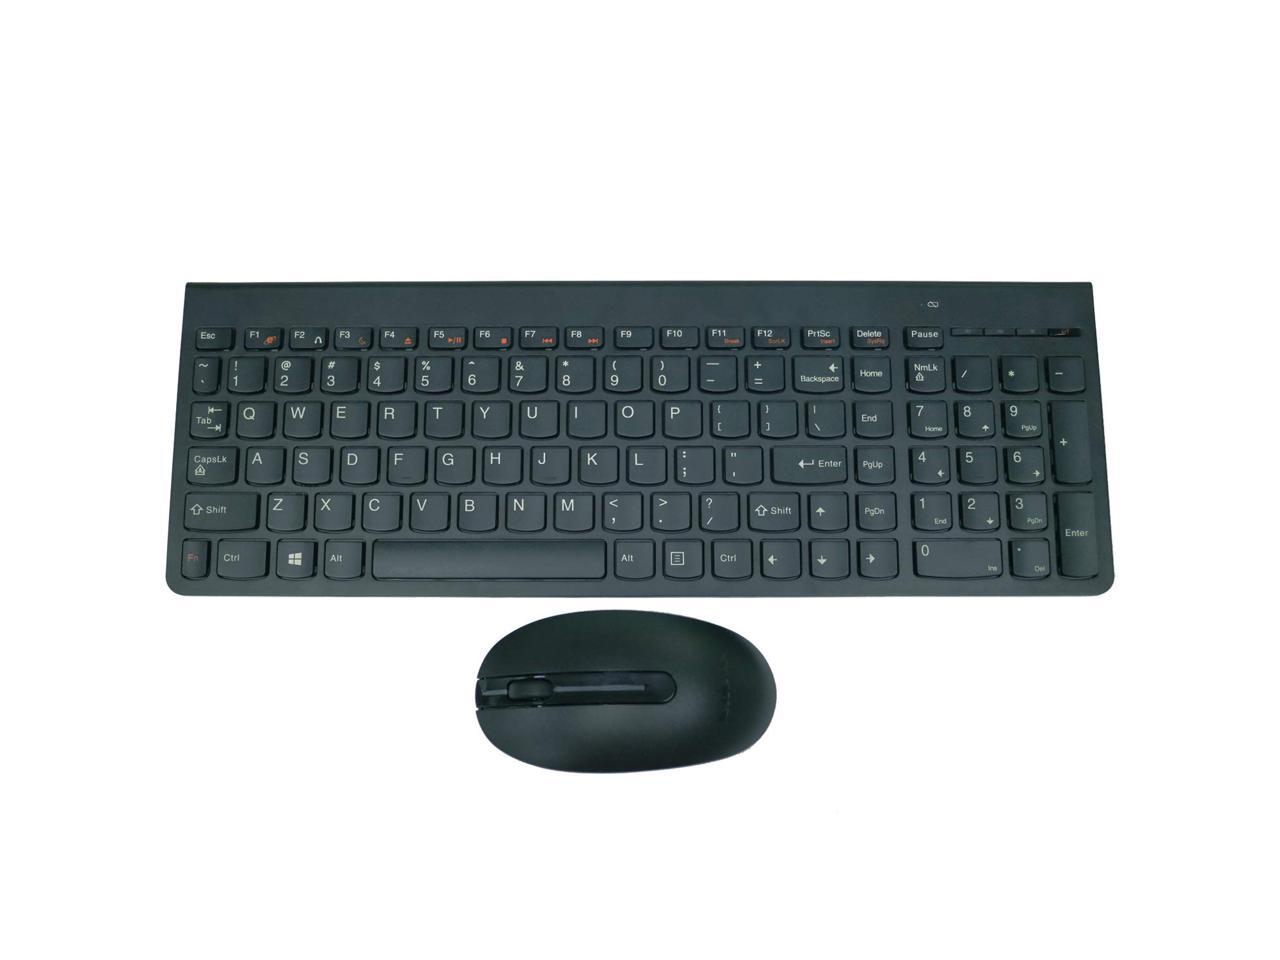 Wireless Keyboard for Lenovo US Keyboard SK-8861 and Mouse Bundle Pack  25209175,  Wireless Connection with USB Receiver for Windows and  Linux PCs or laptops 